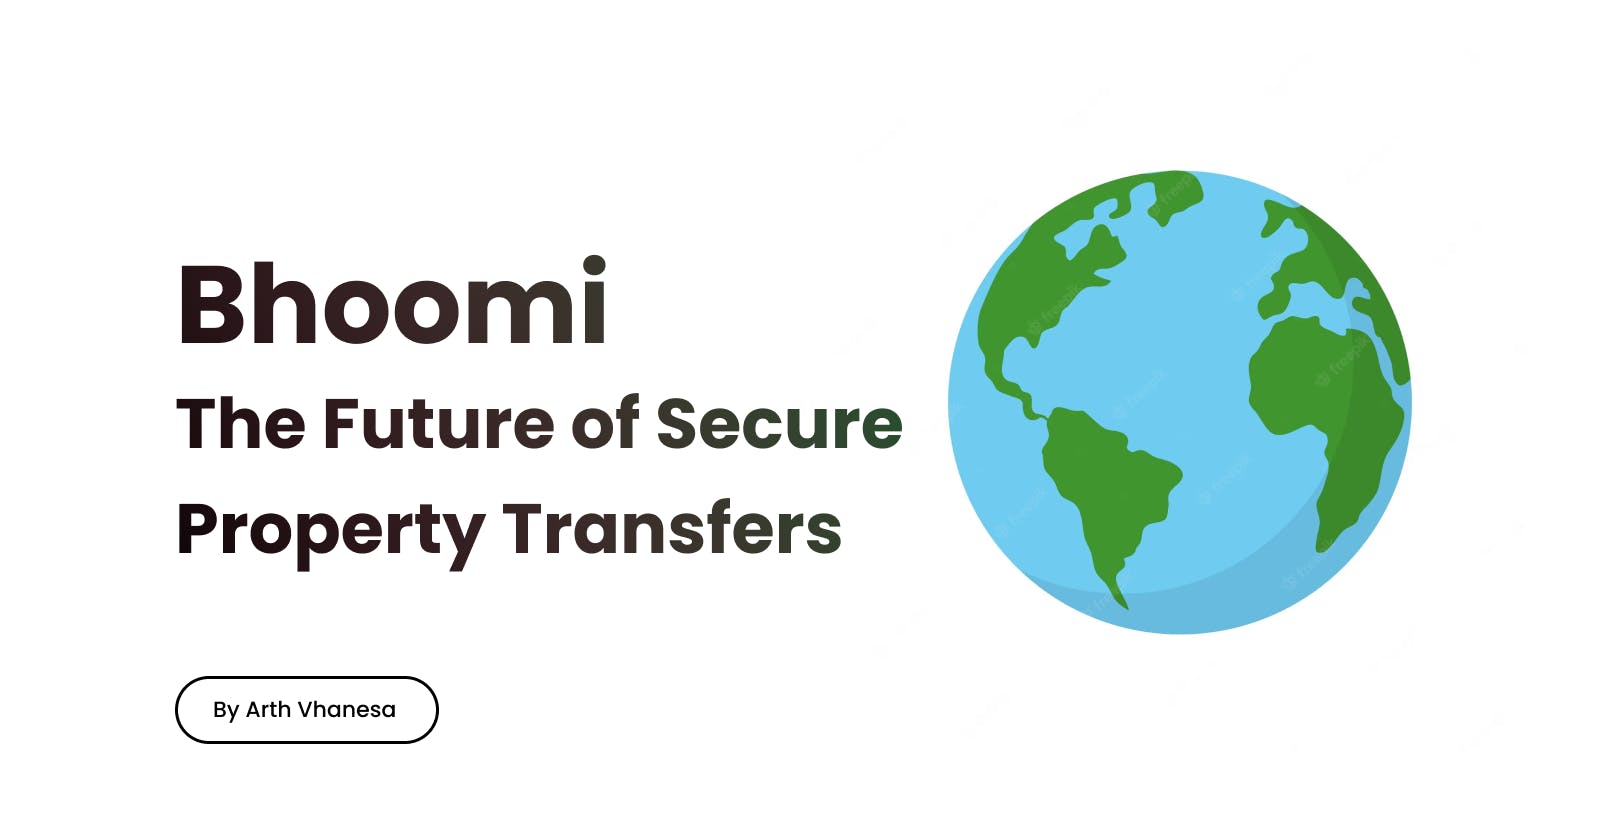 Bhoomi — The Future of Secure Property Transfers